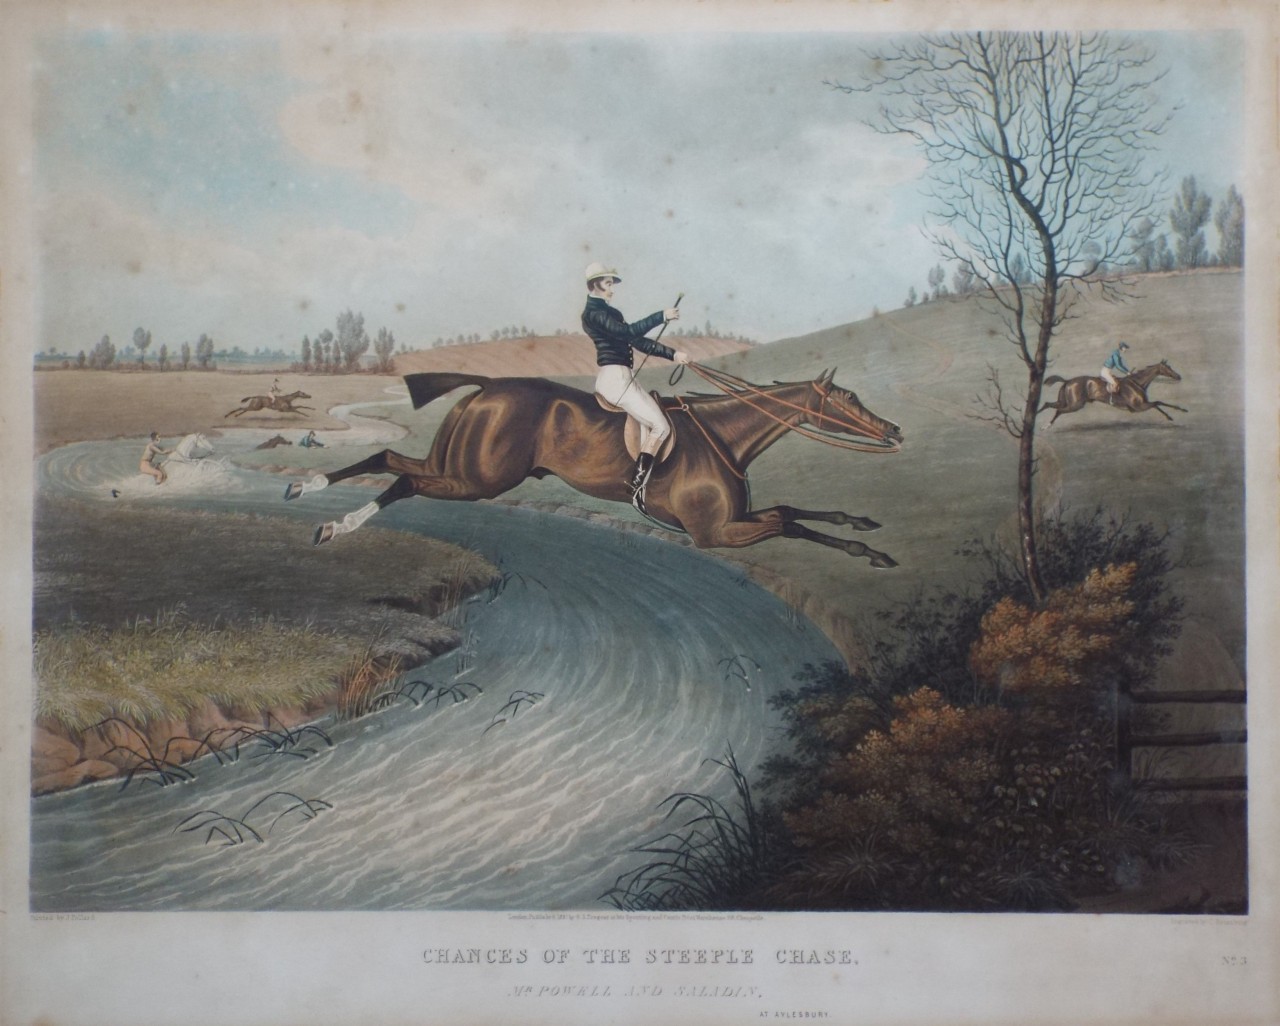 Aquatint - Chances of the Steeple Chase. 3. Mr. Powell and Saladin. At Aylesbury. - Rosenberg